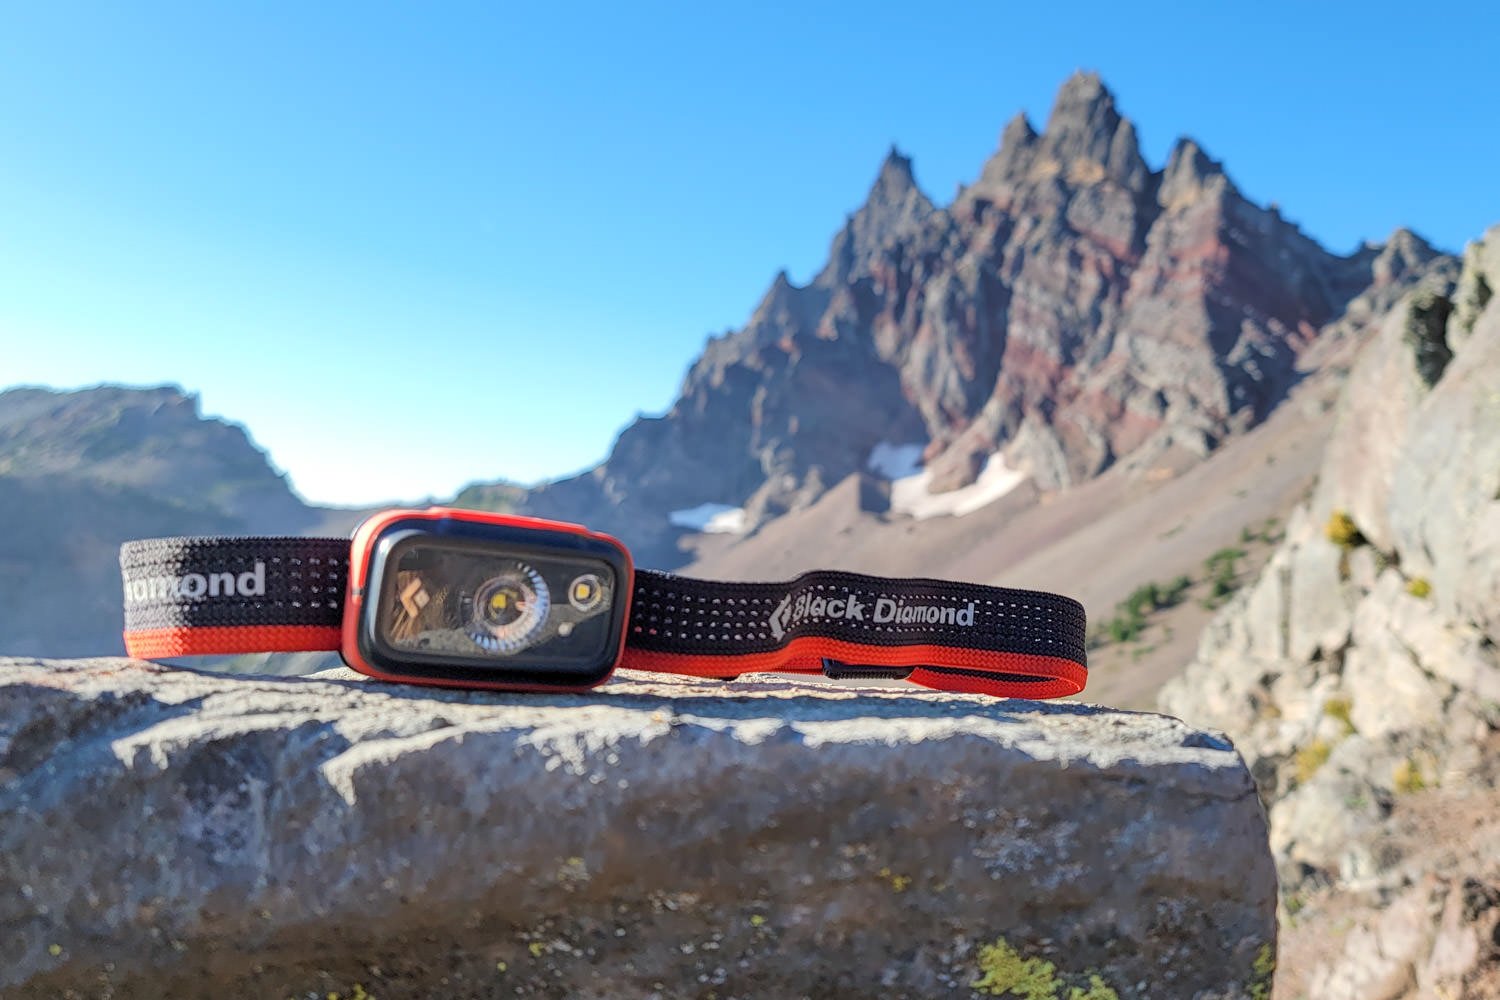 Black Diamond Spot 350 Headlamp sitting on a rock with a mountain in the background